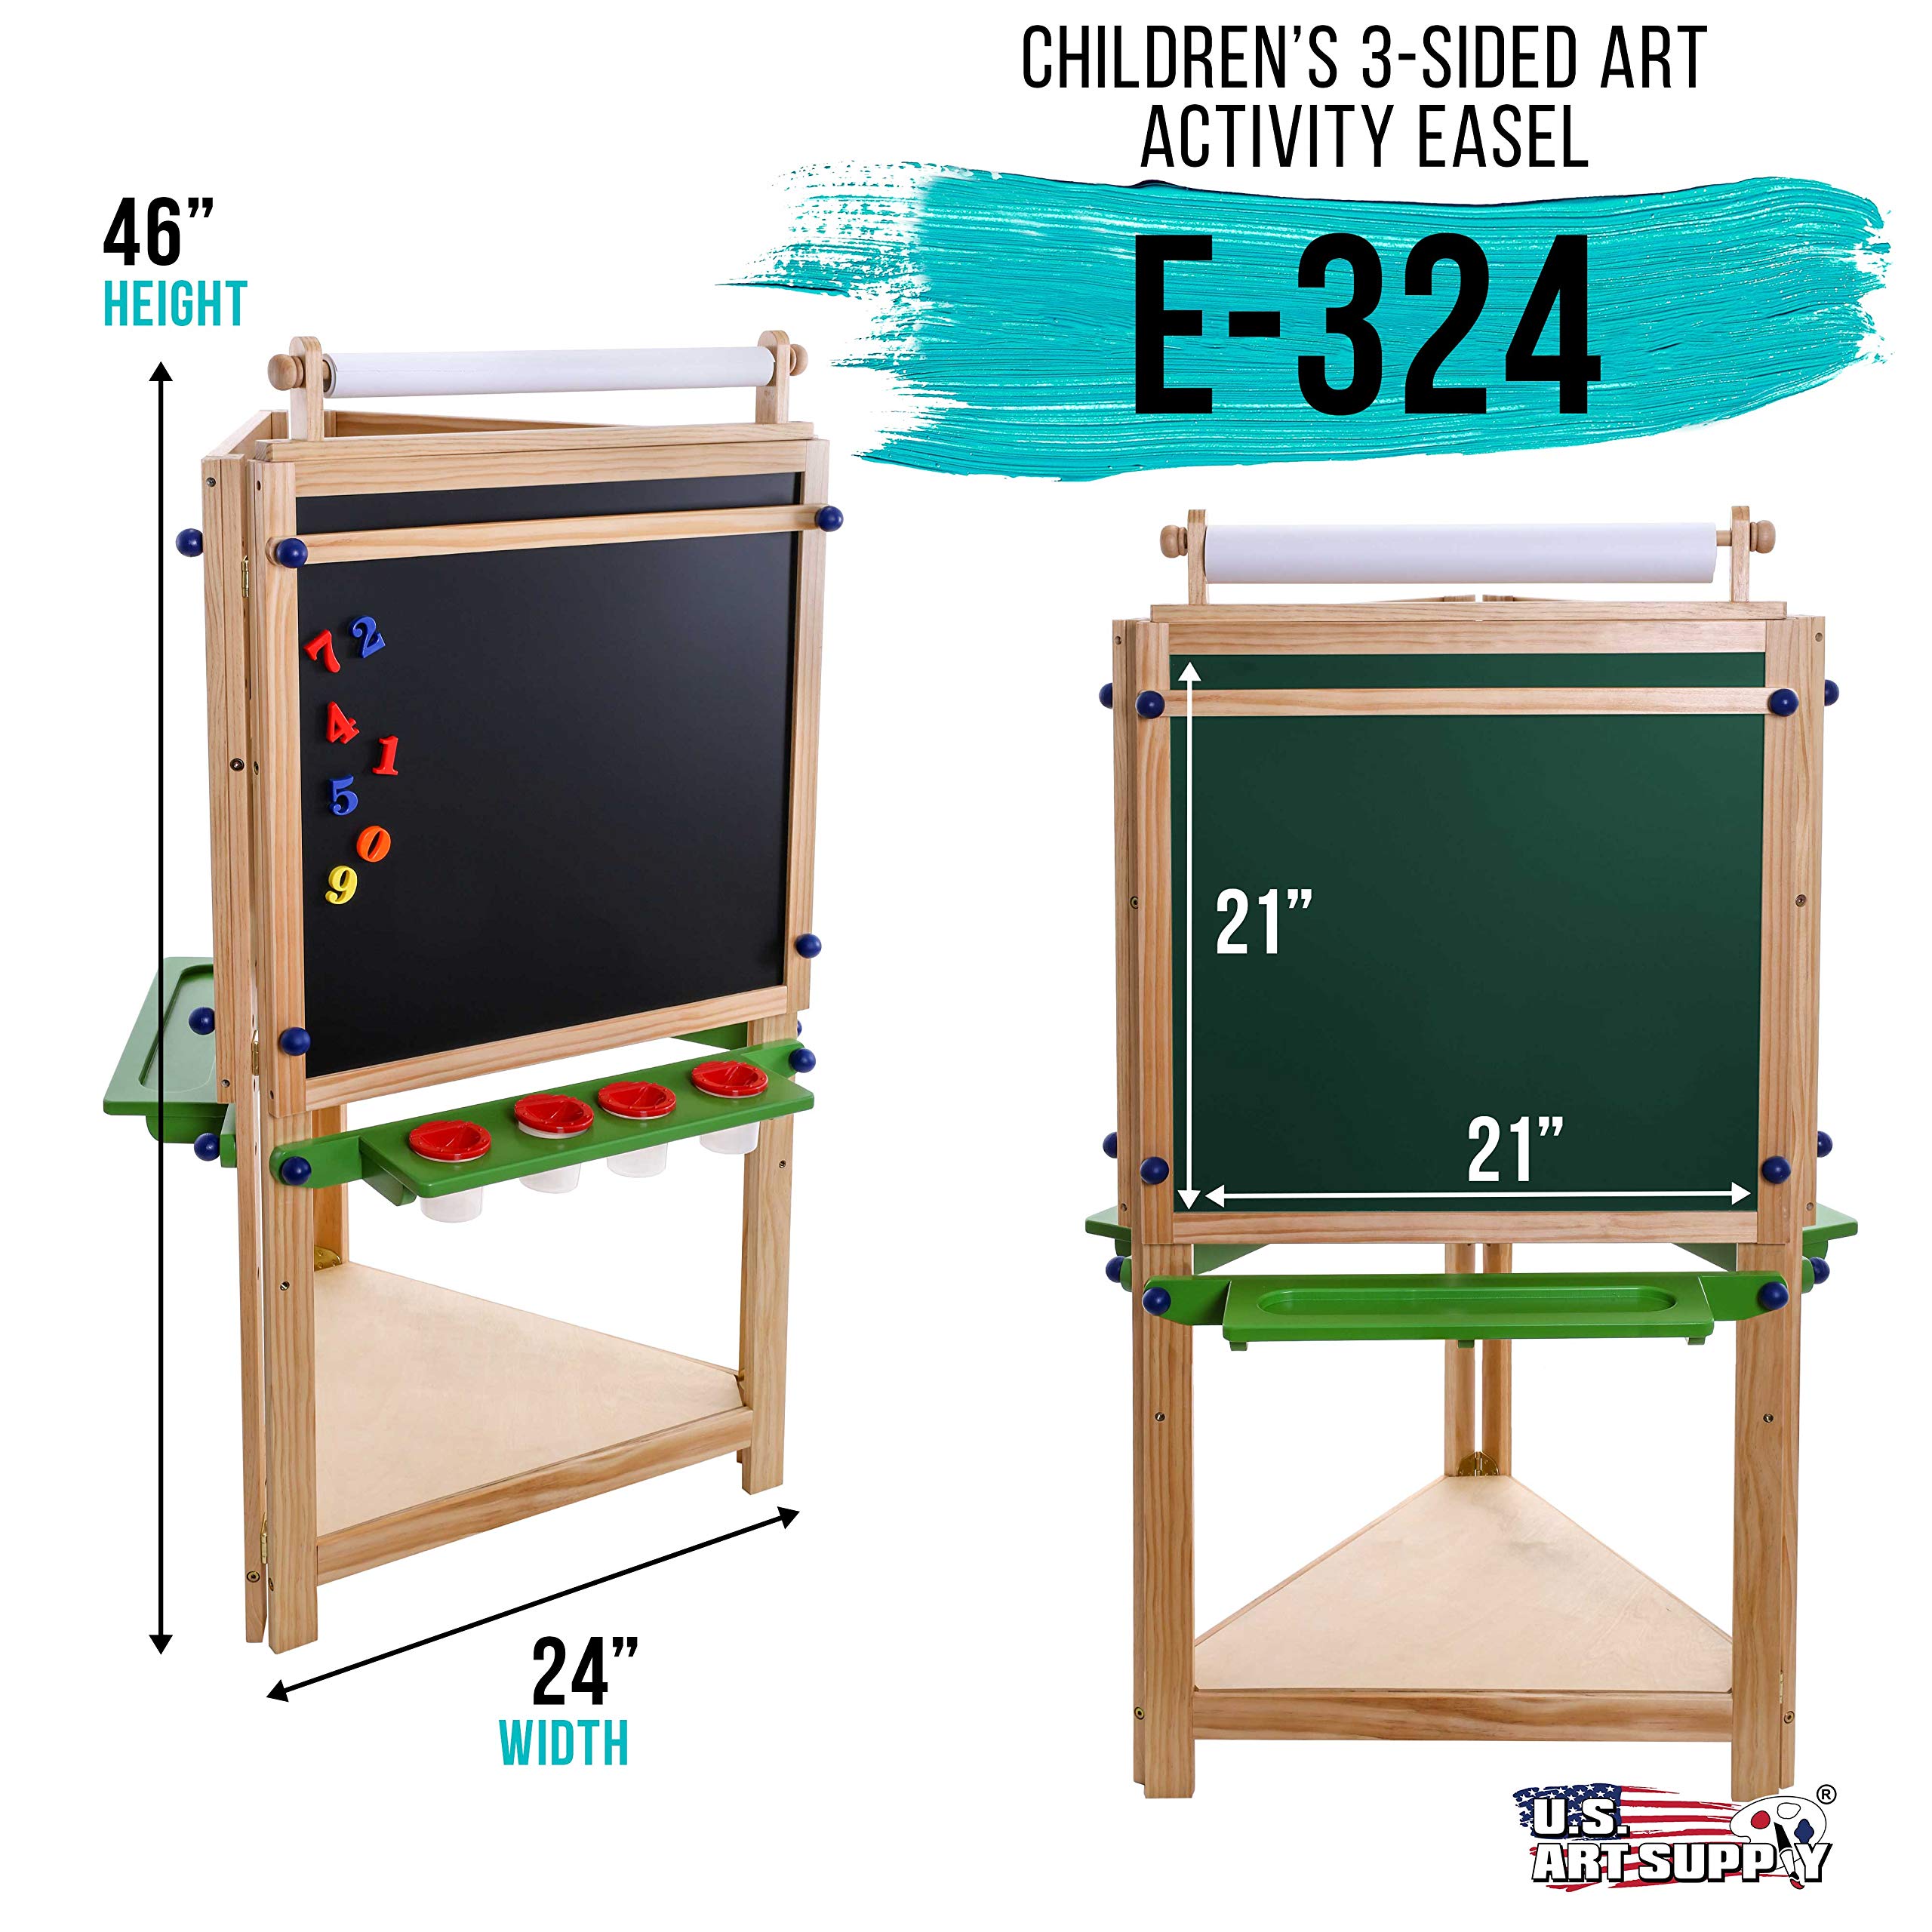 U.S. Art Supply Children's 3-Sided Art Activity Easel with Chalkboard, Large Paper Roll, Shelf & Plastic Paint Cups